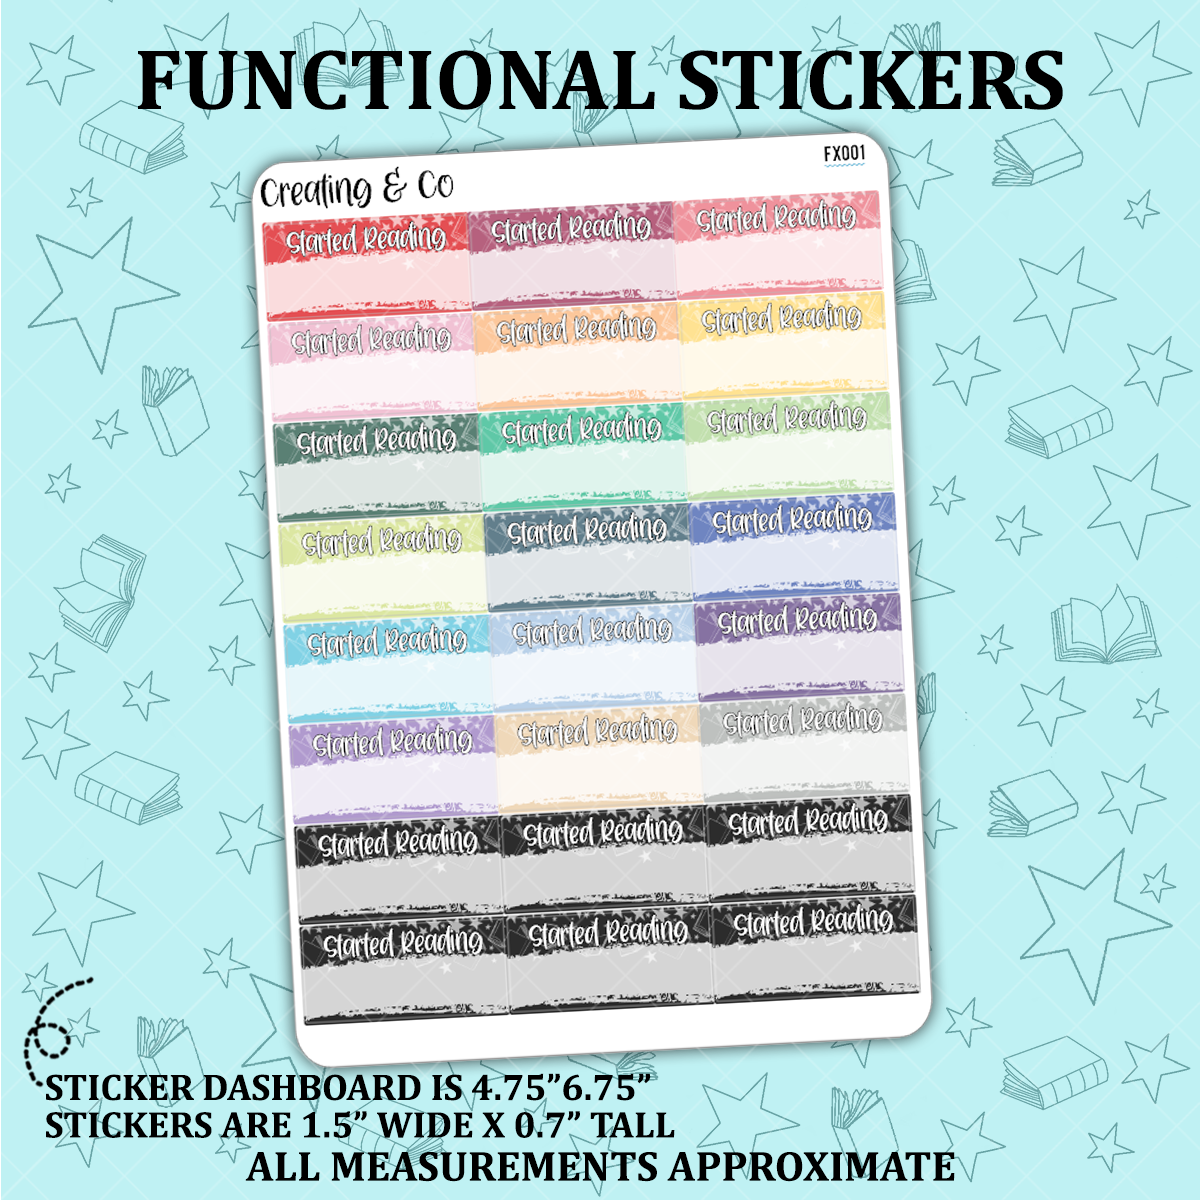 Started Reading Functional Sticker Sheet - FX001